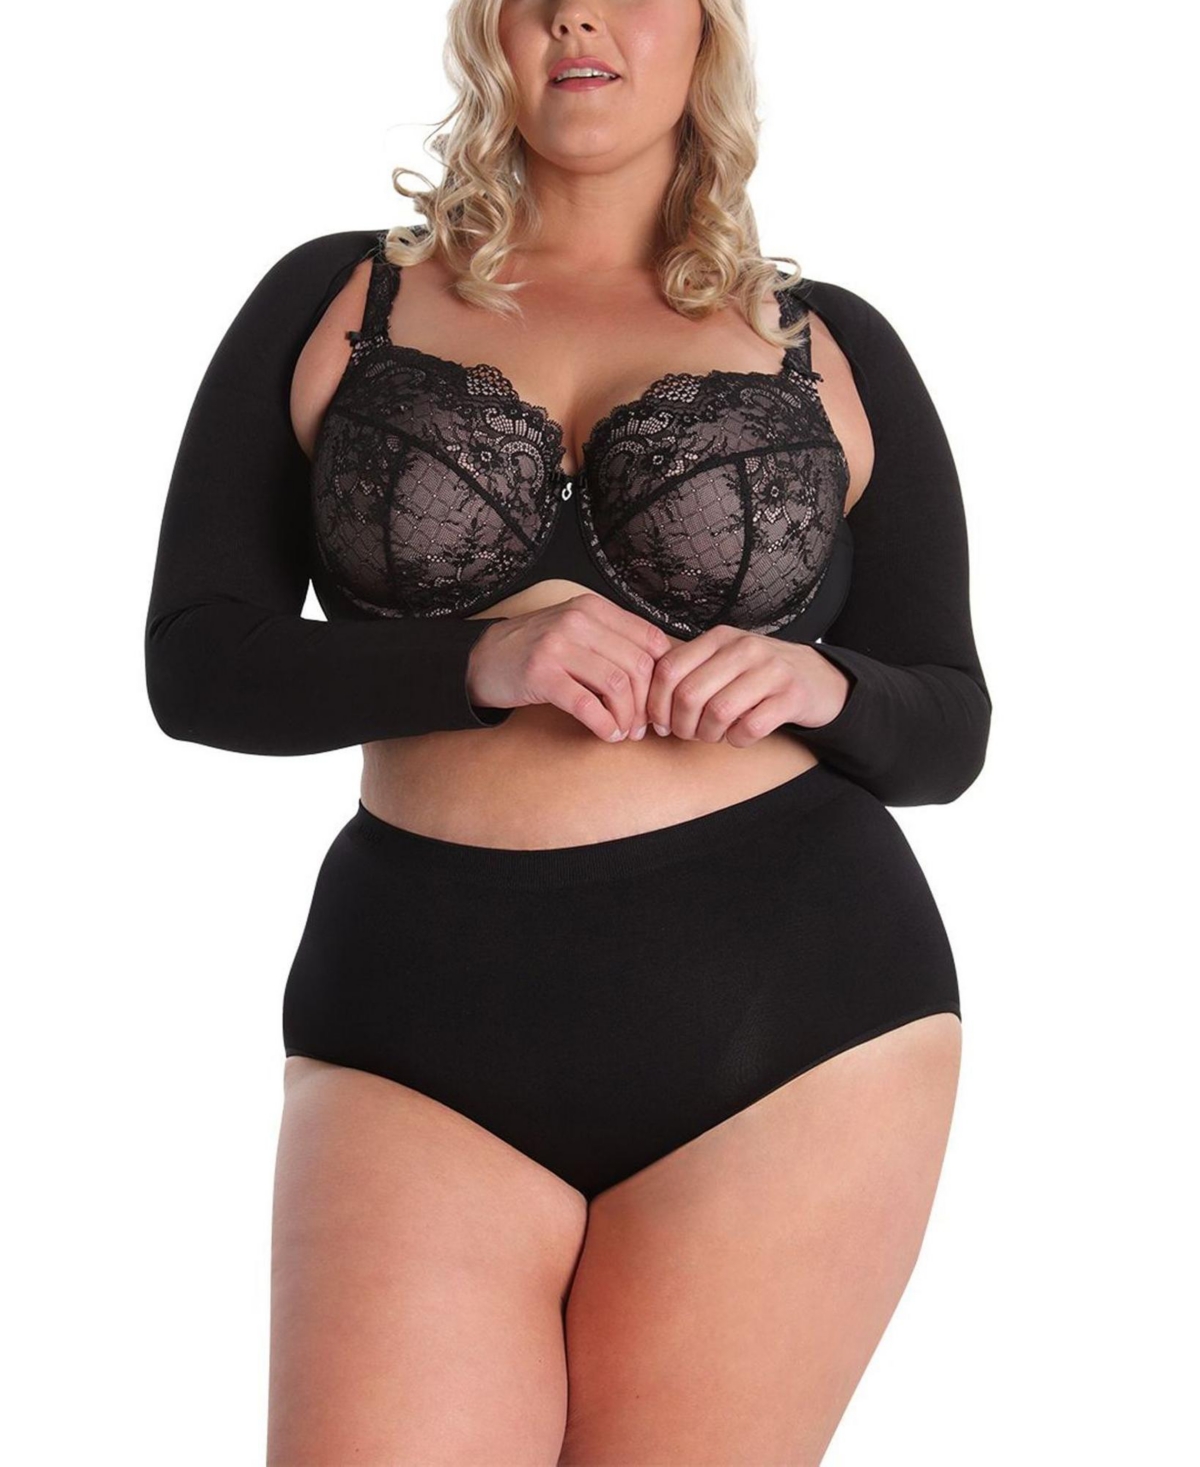 Plus Size SlimMe Seamless Control Top Shaping Panty - Black